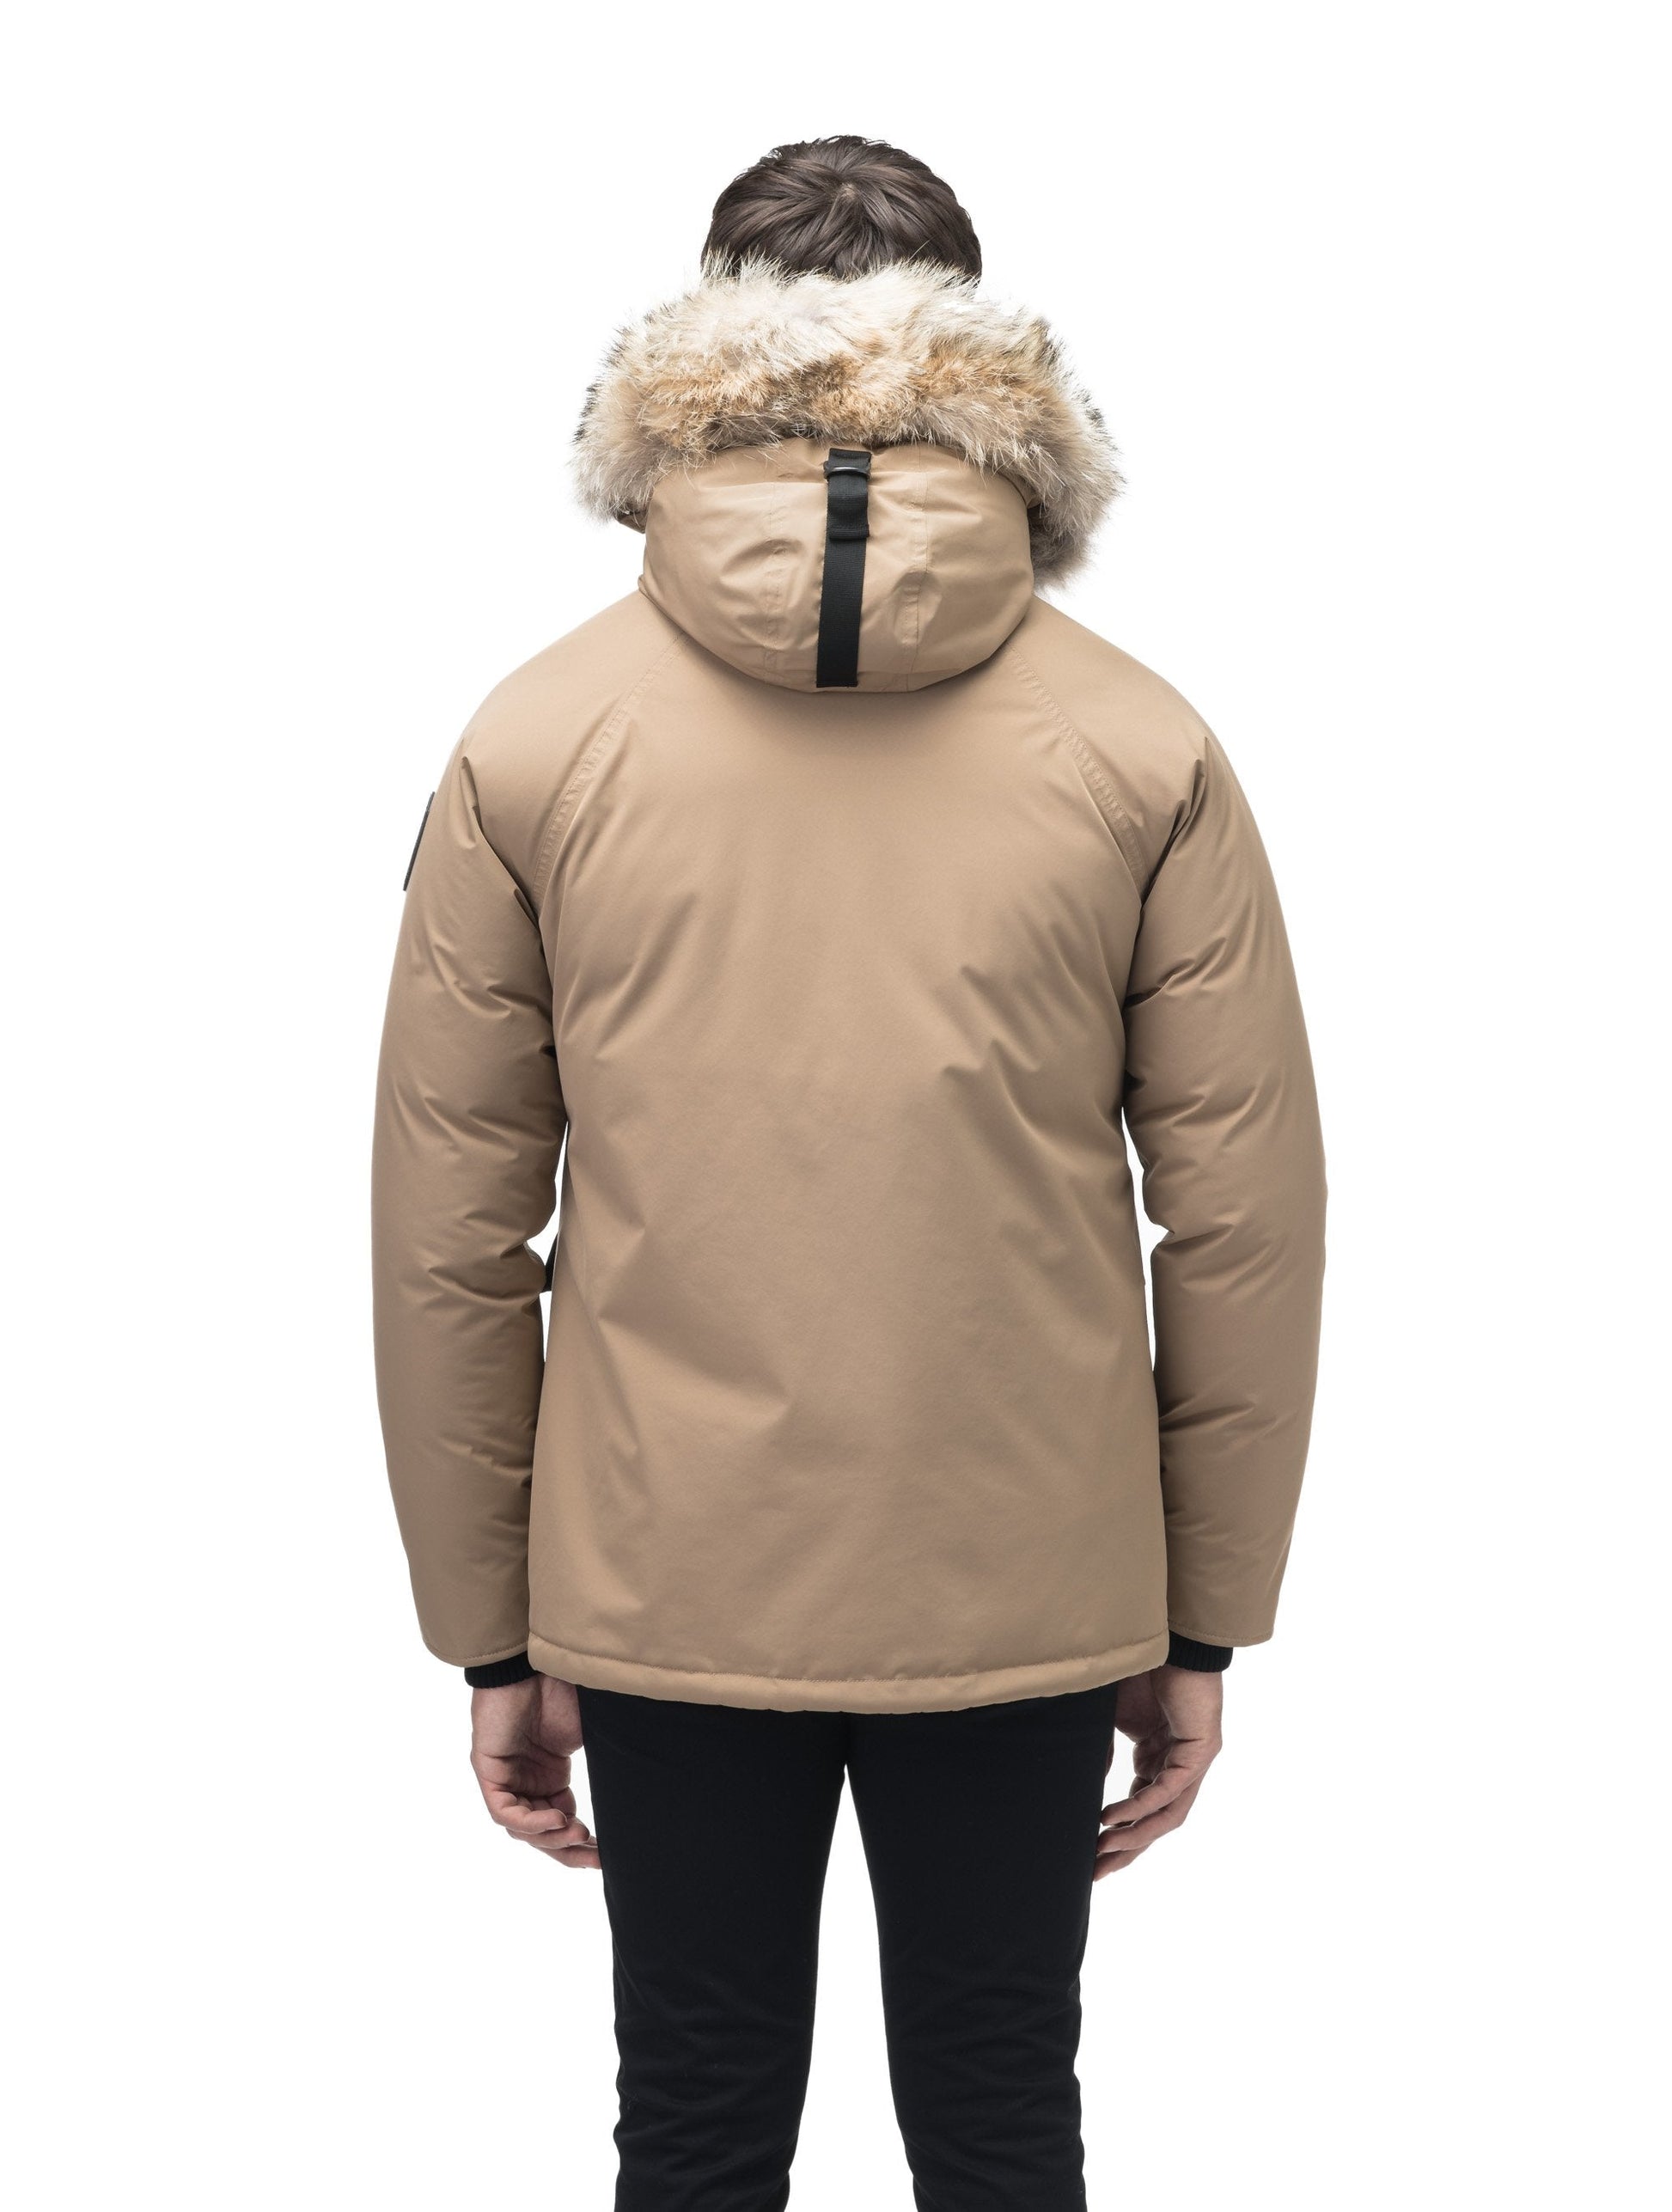 Men's waist length down filled jacket with two front pockets with magnetic closure and a removable fur trim on the hood in Cork